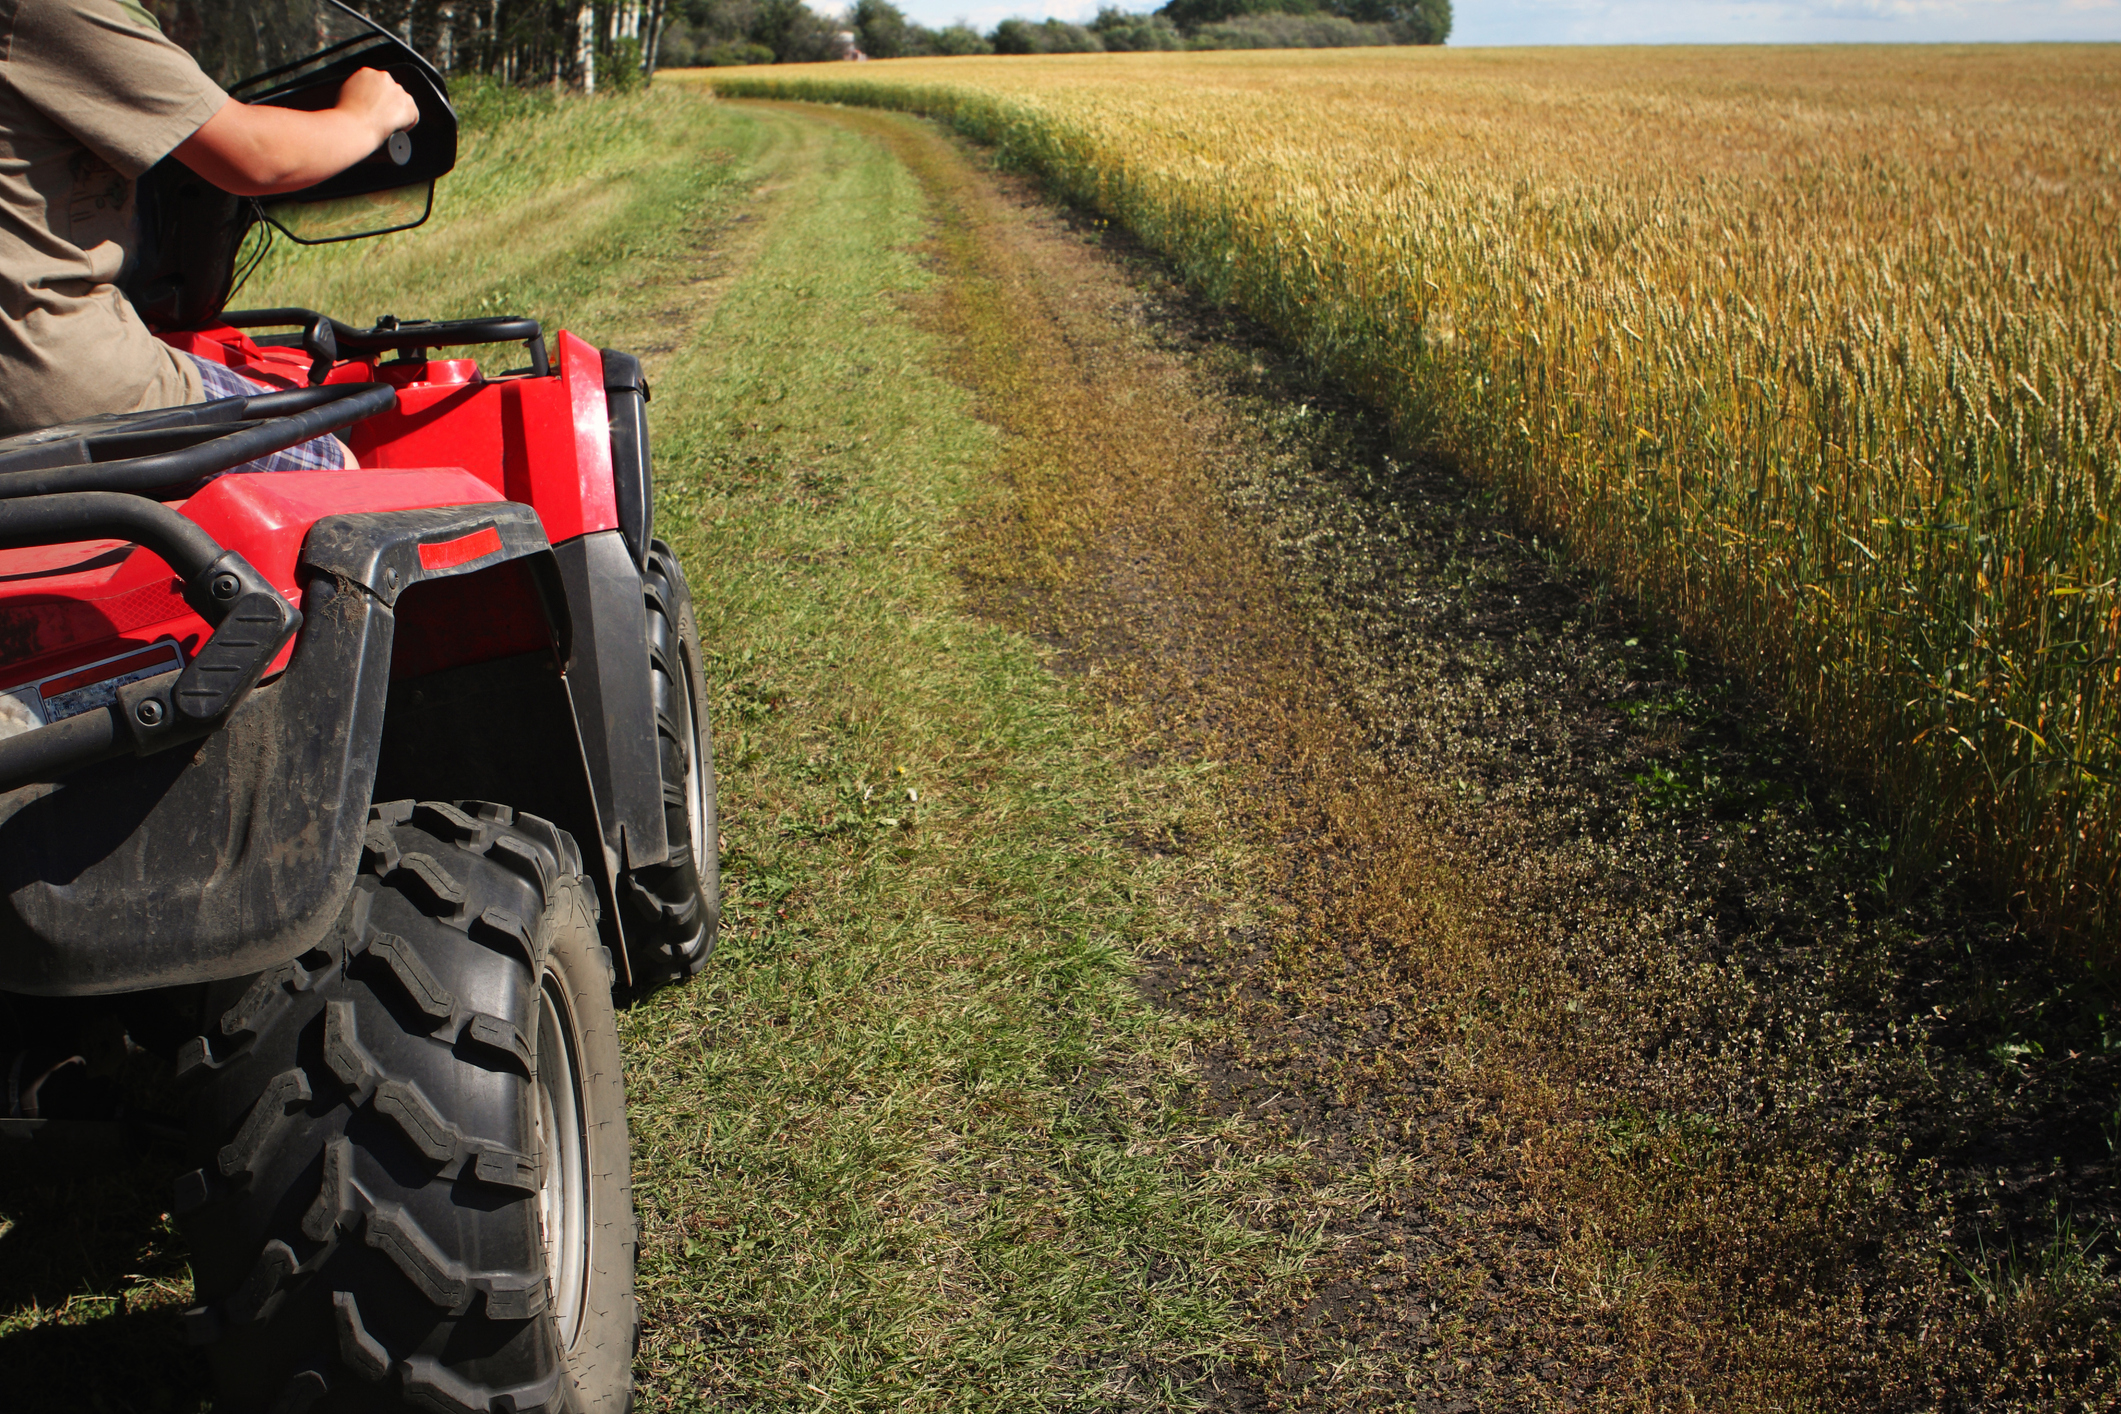 a teen on an ATV driving on a lane checking out the crop in the field